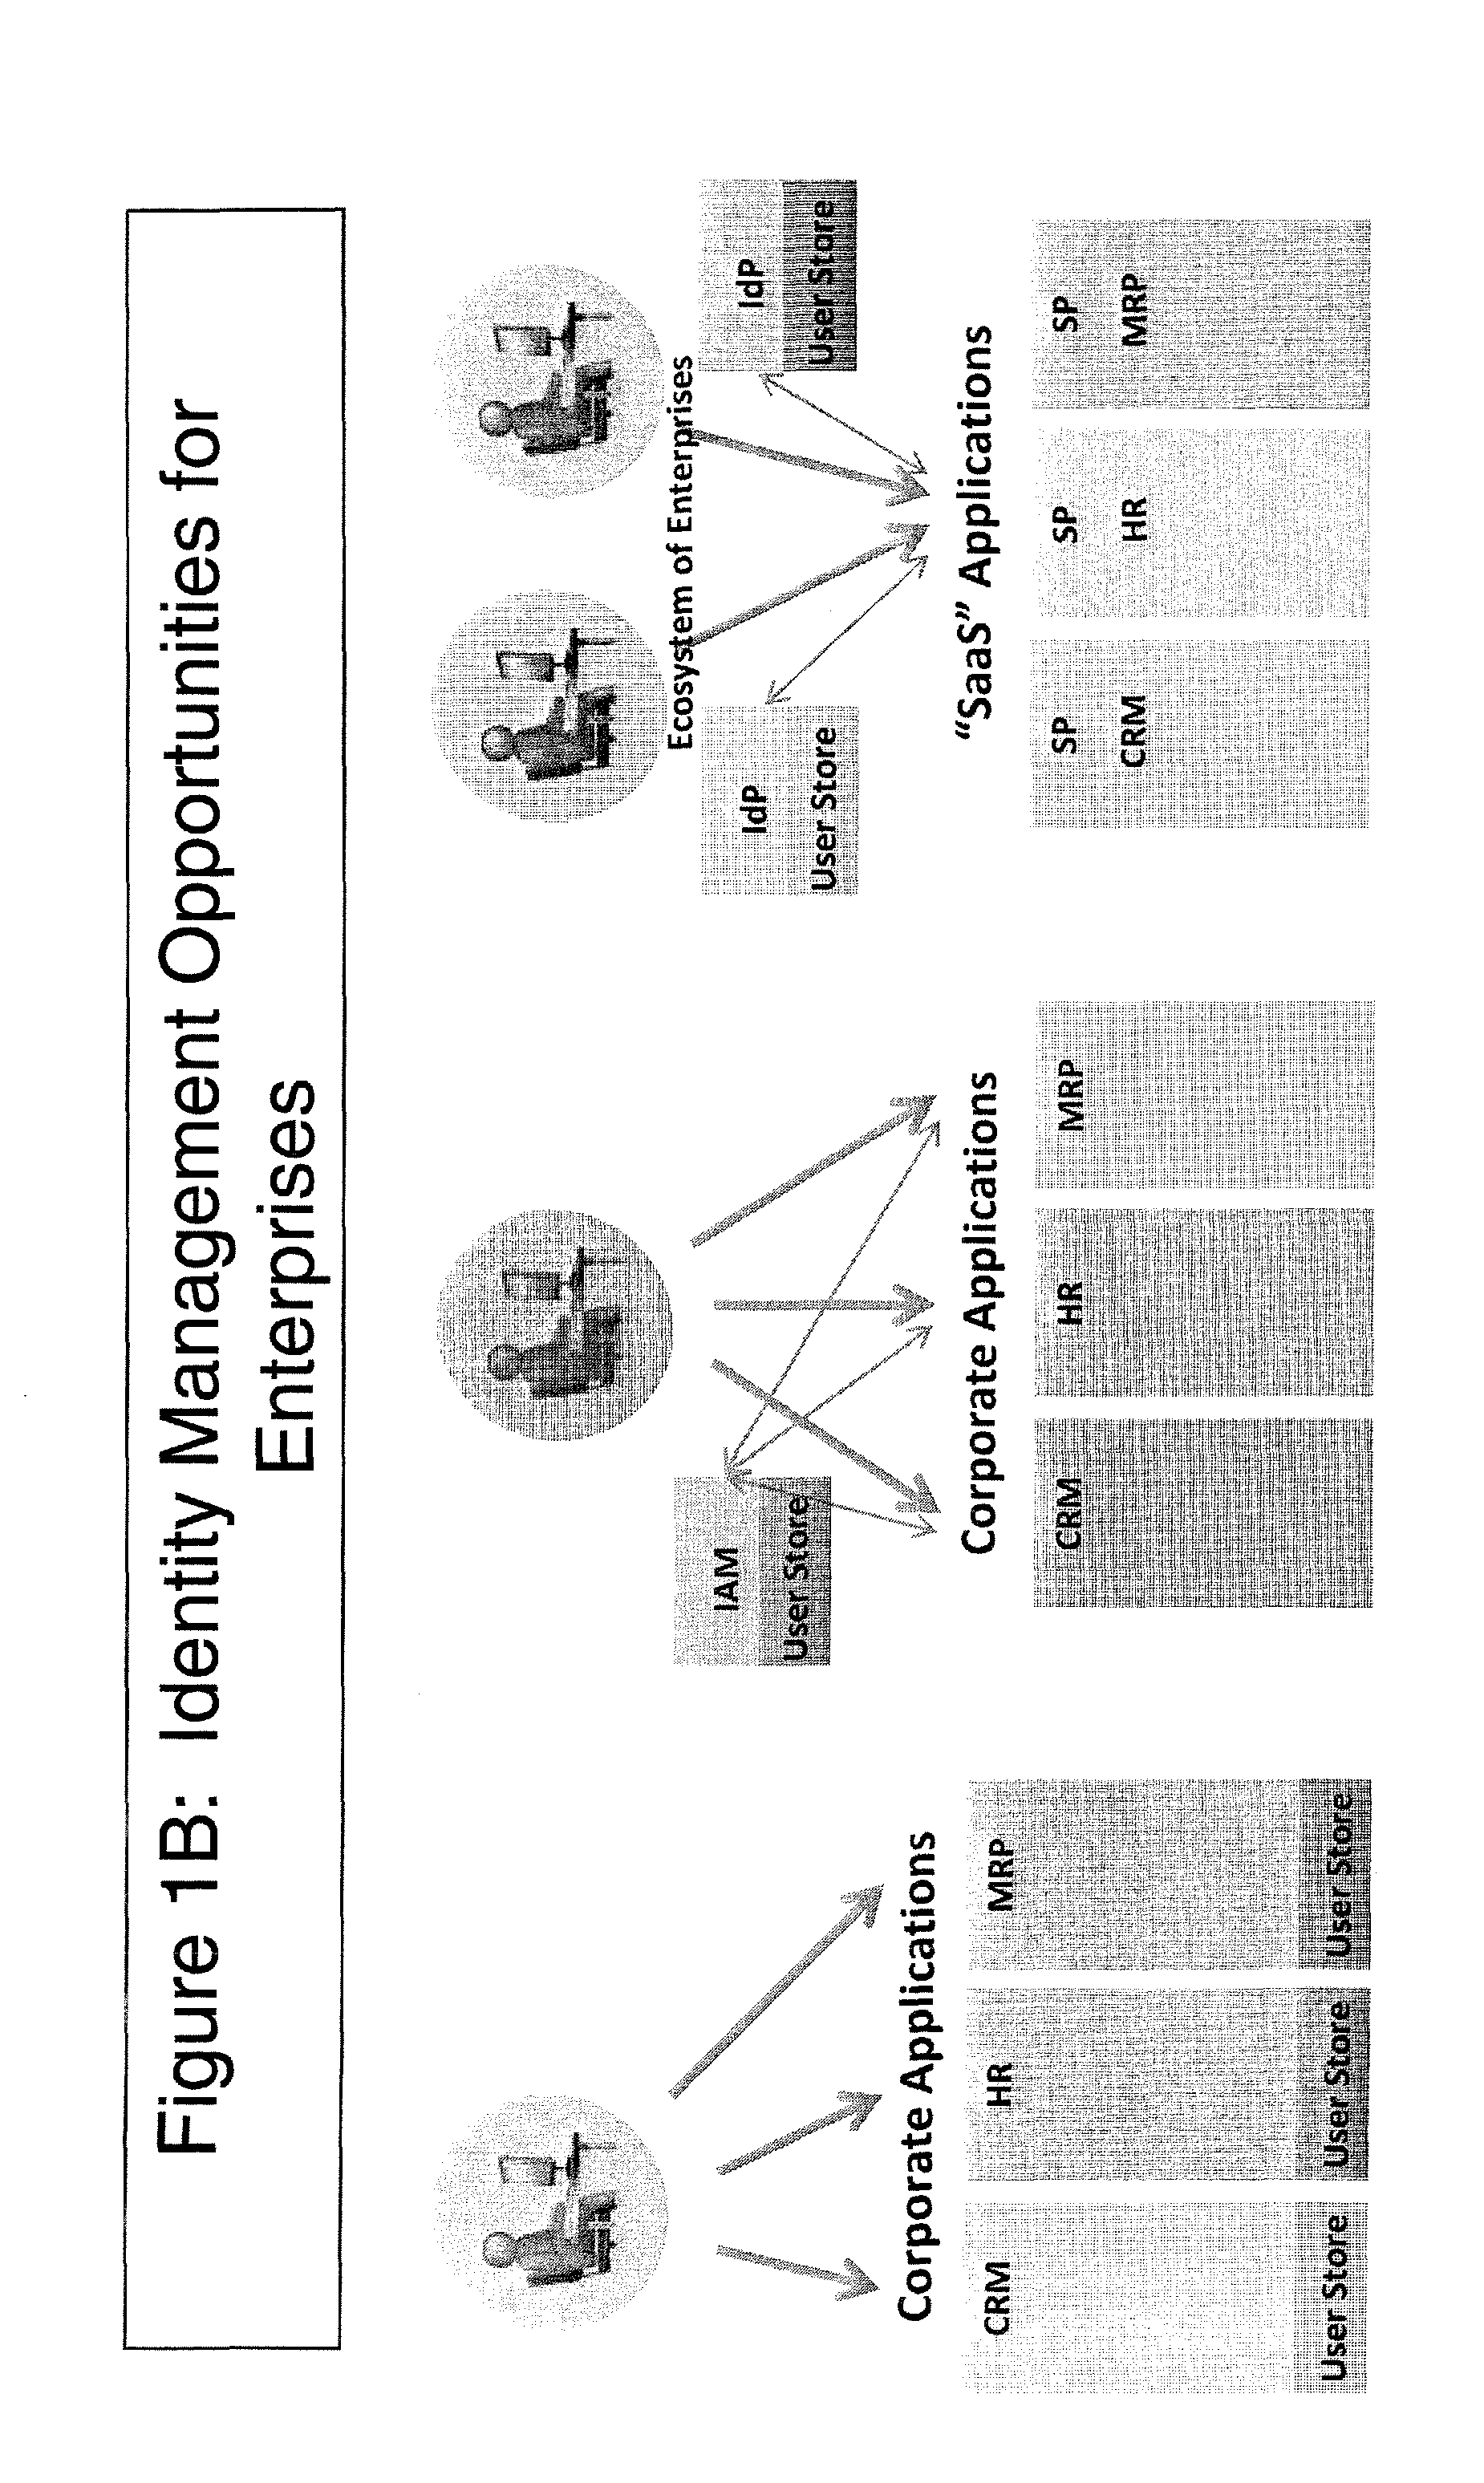 Method and apparatus for multi-domain identity interoperability and compliance verification